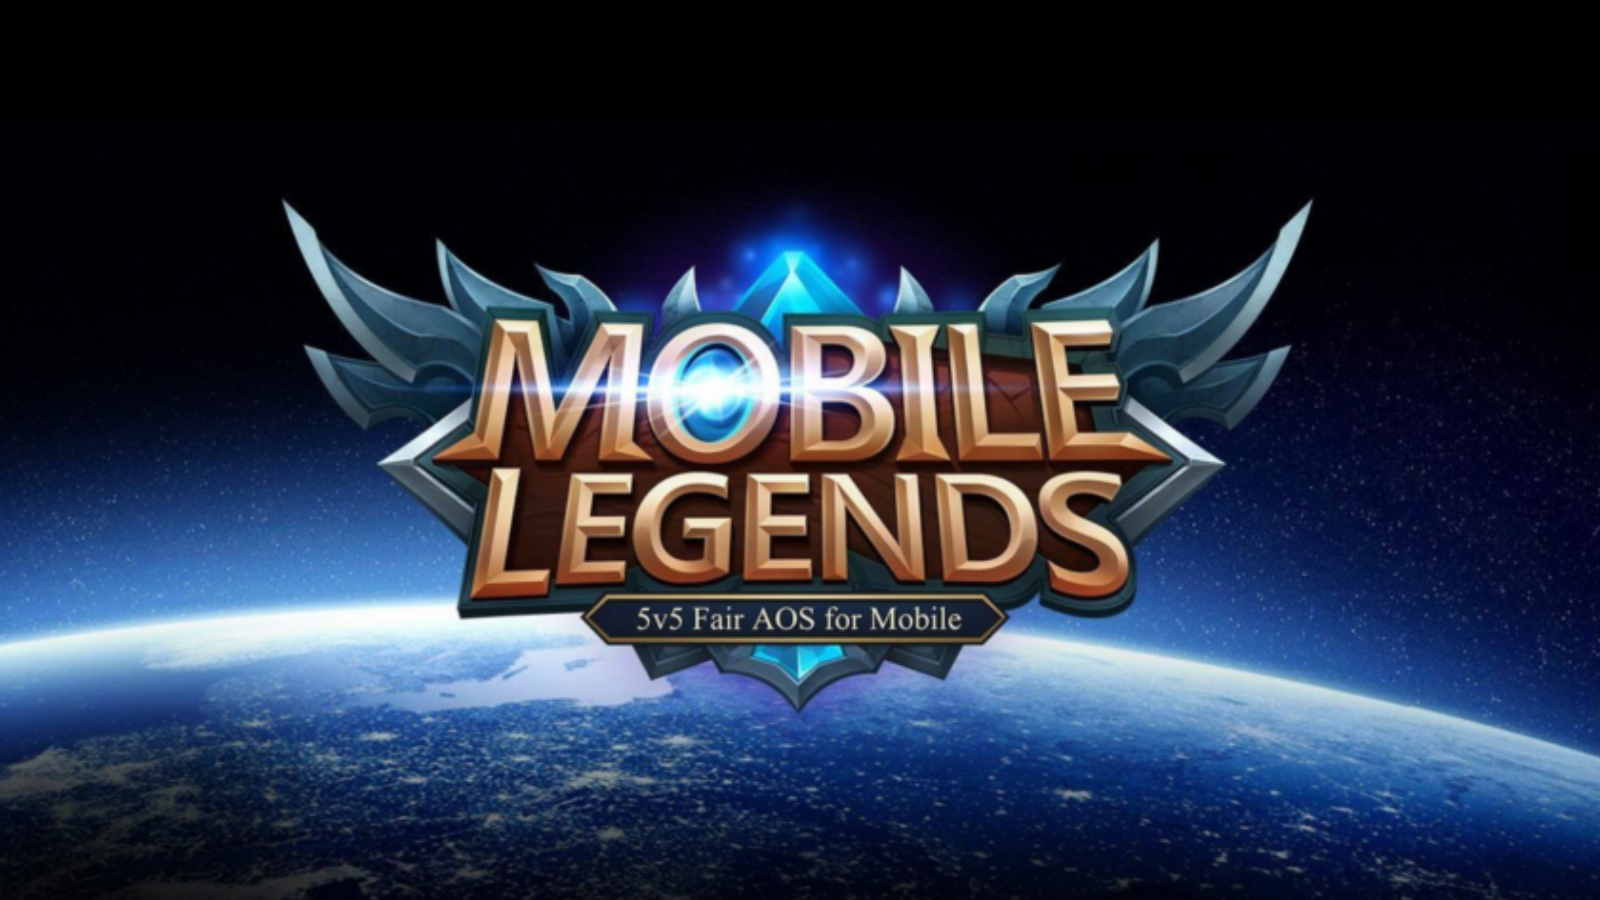 Mobile Legends esports event gets massive viewership on YouTube ...